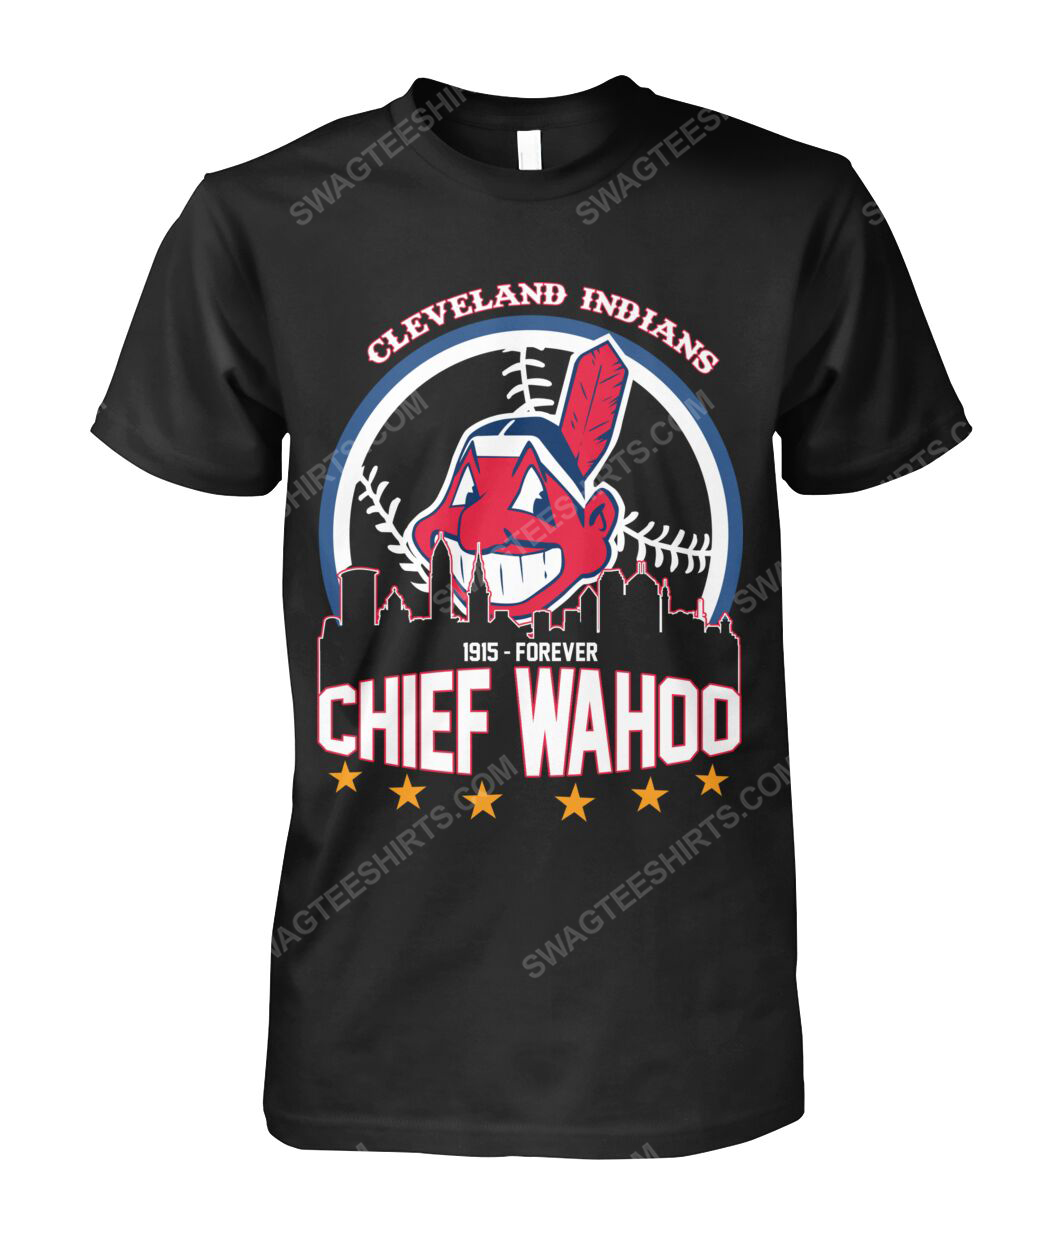 The cleveland indians 1915 forever chief wahoo tshirt 1